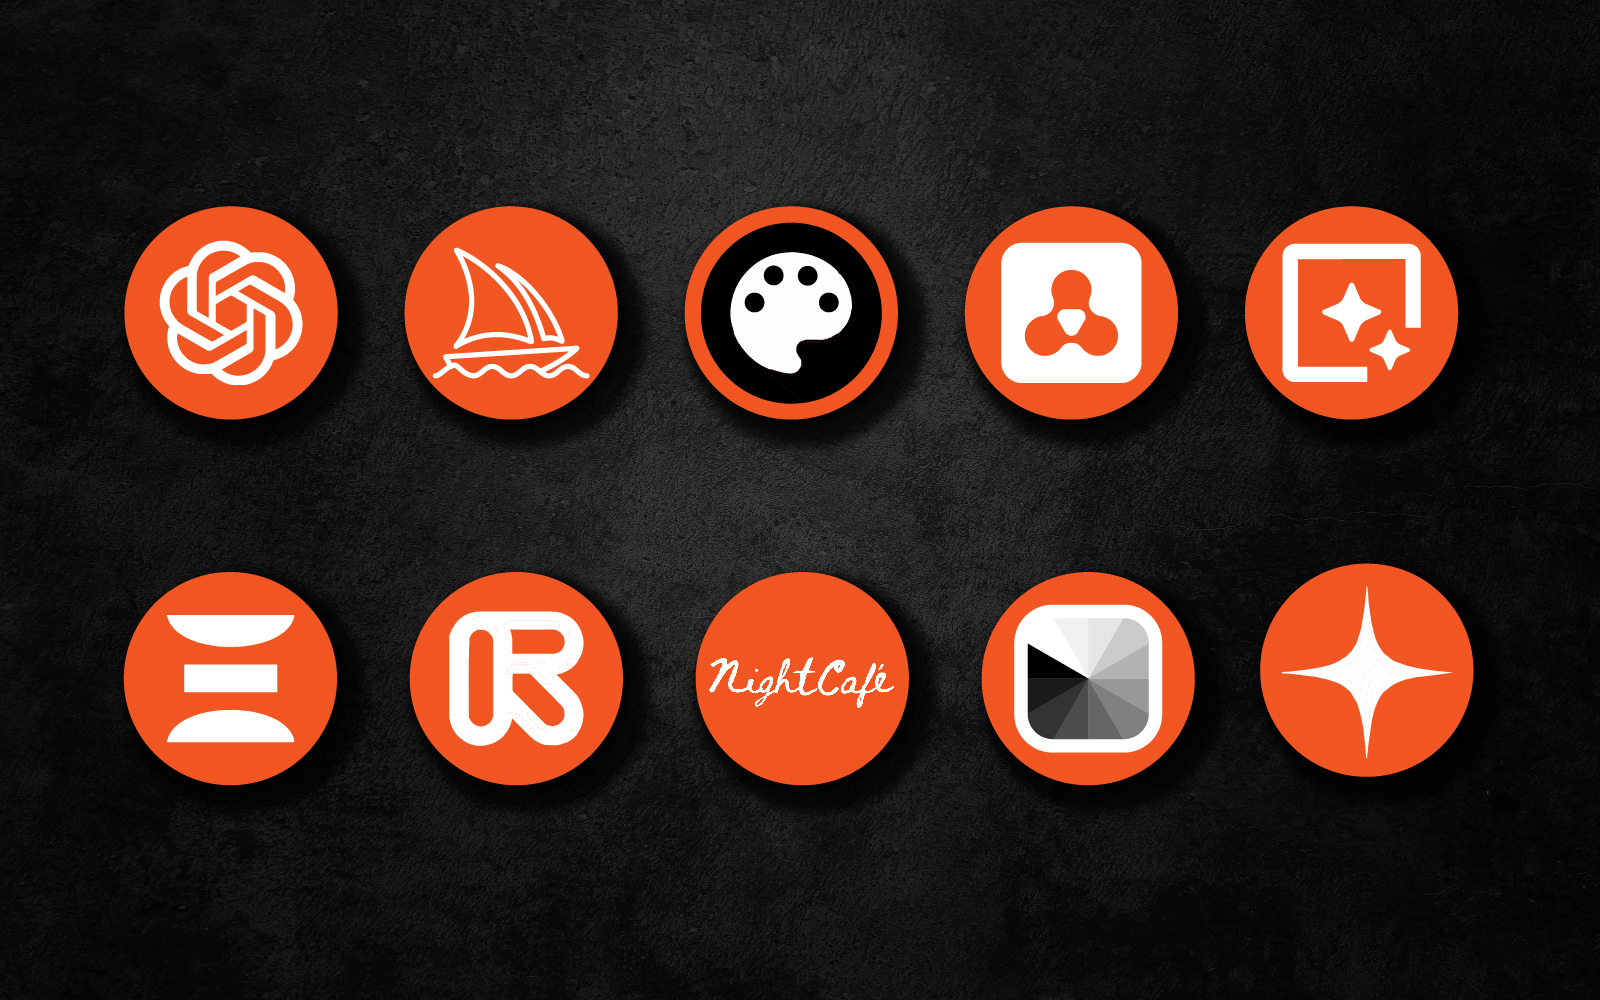 A sleek array of orange design software icons on a dark textured background, including a prominent central icon labeled "NightCafe."